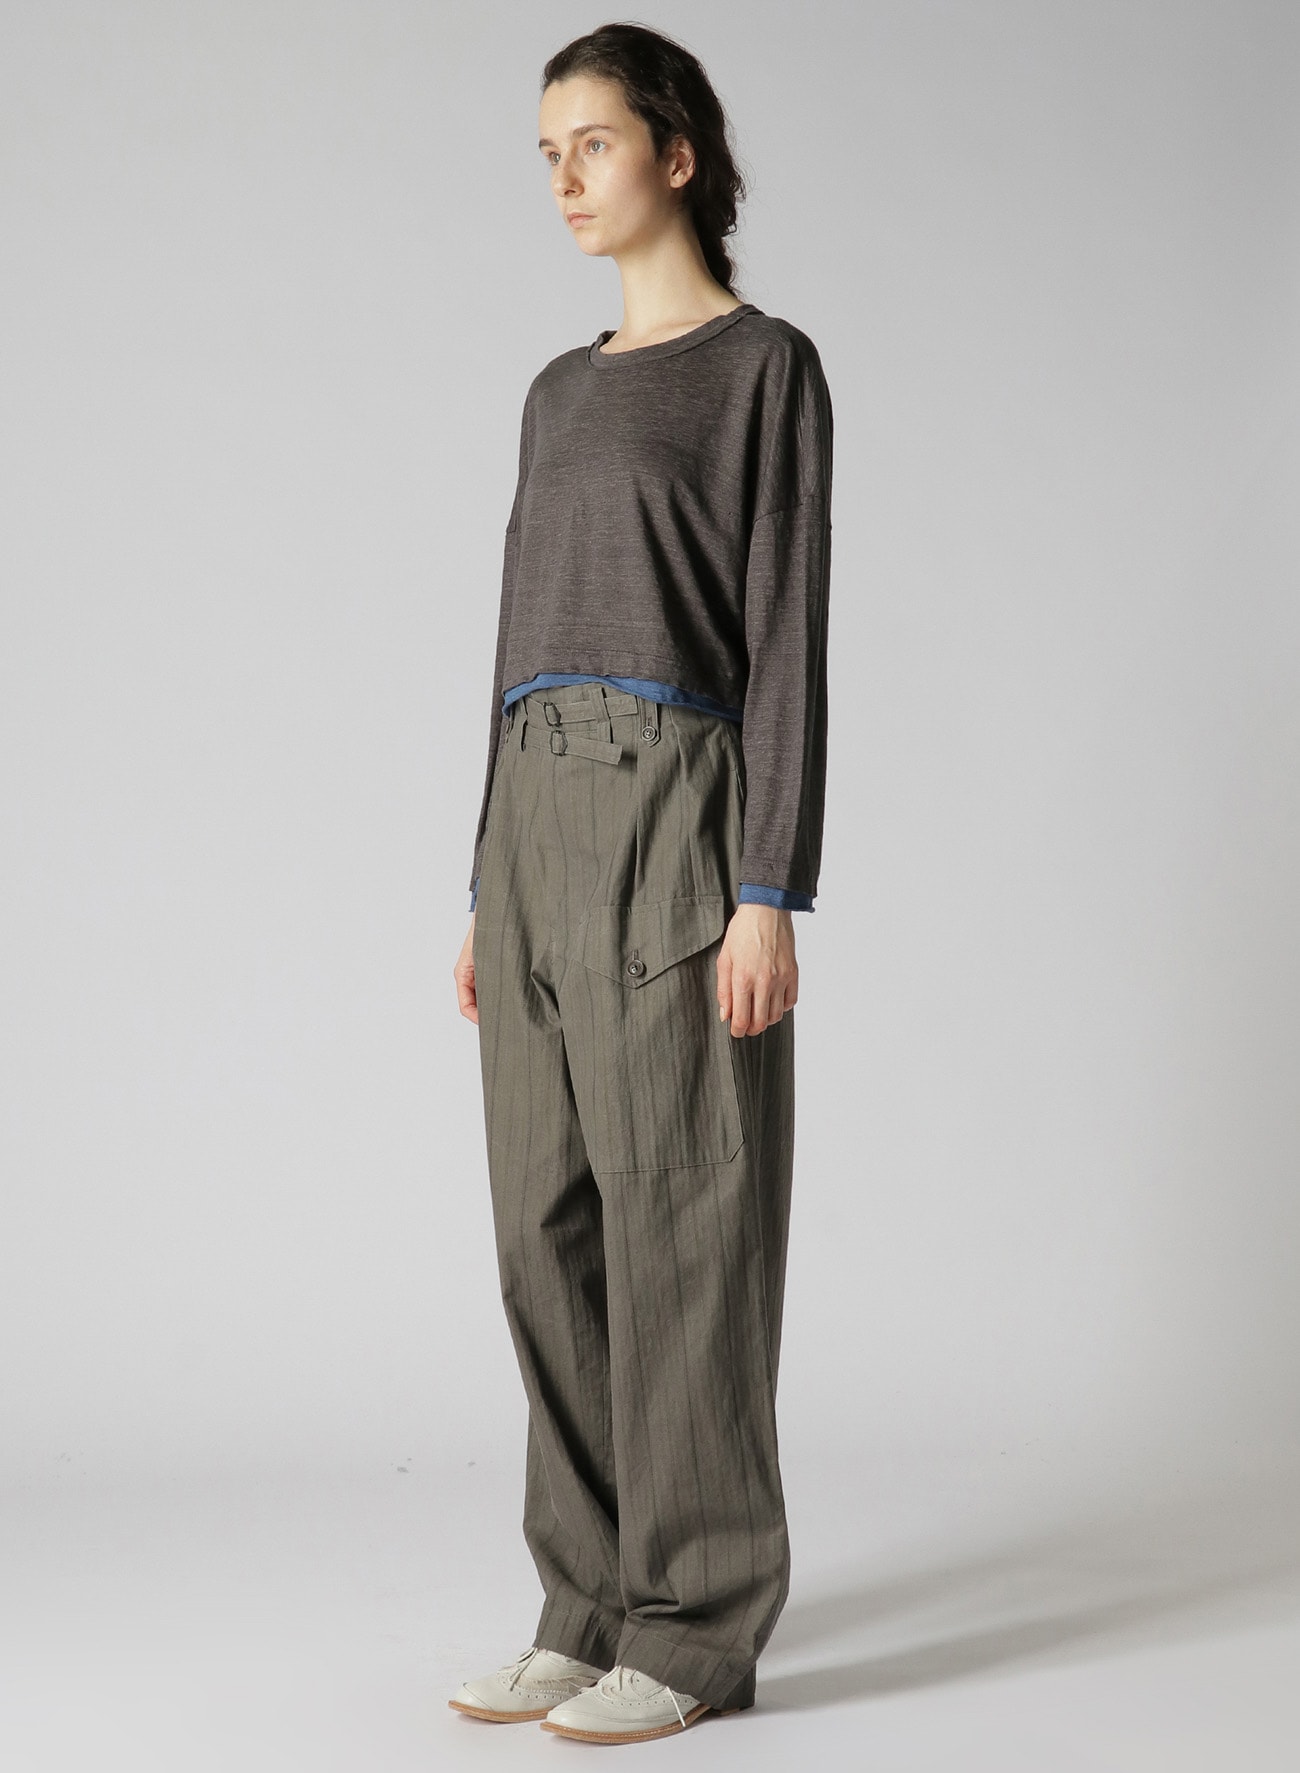 LINEN JERSEY LONG SLEEVE CROPPED T(S Charcoal): Y's｜THE SHOP 